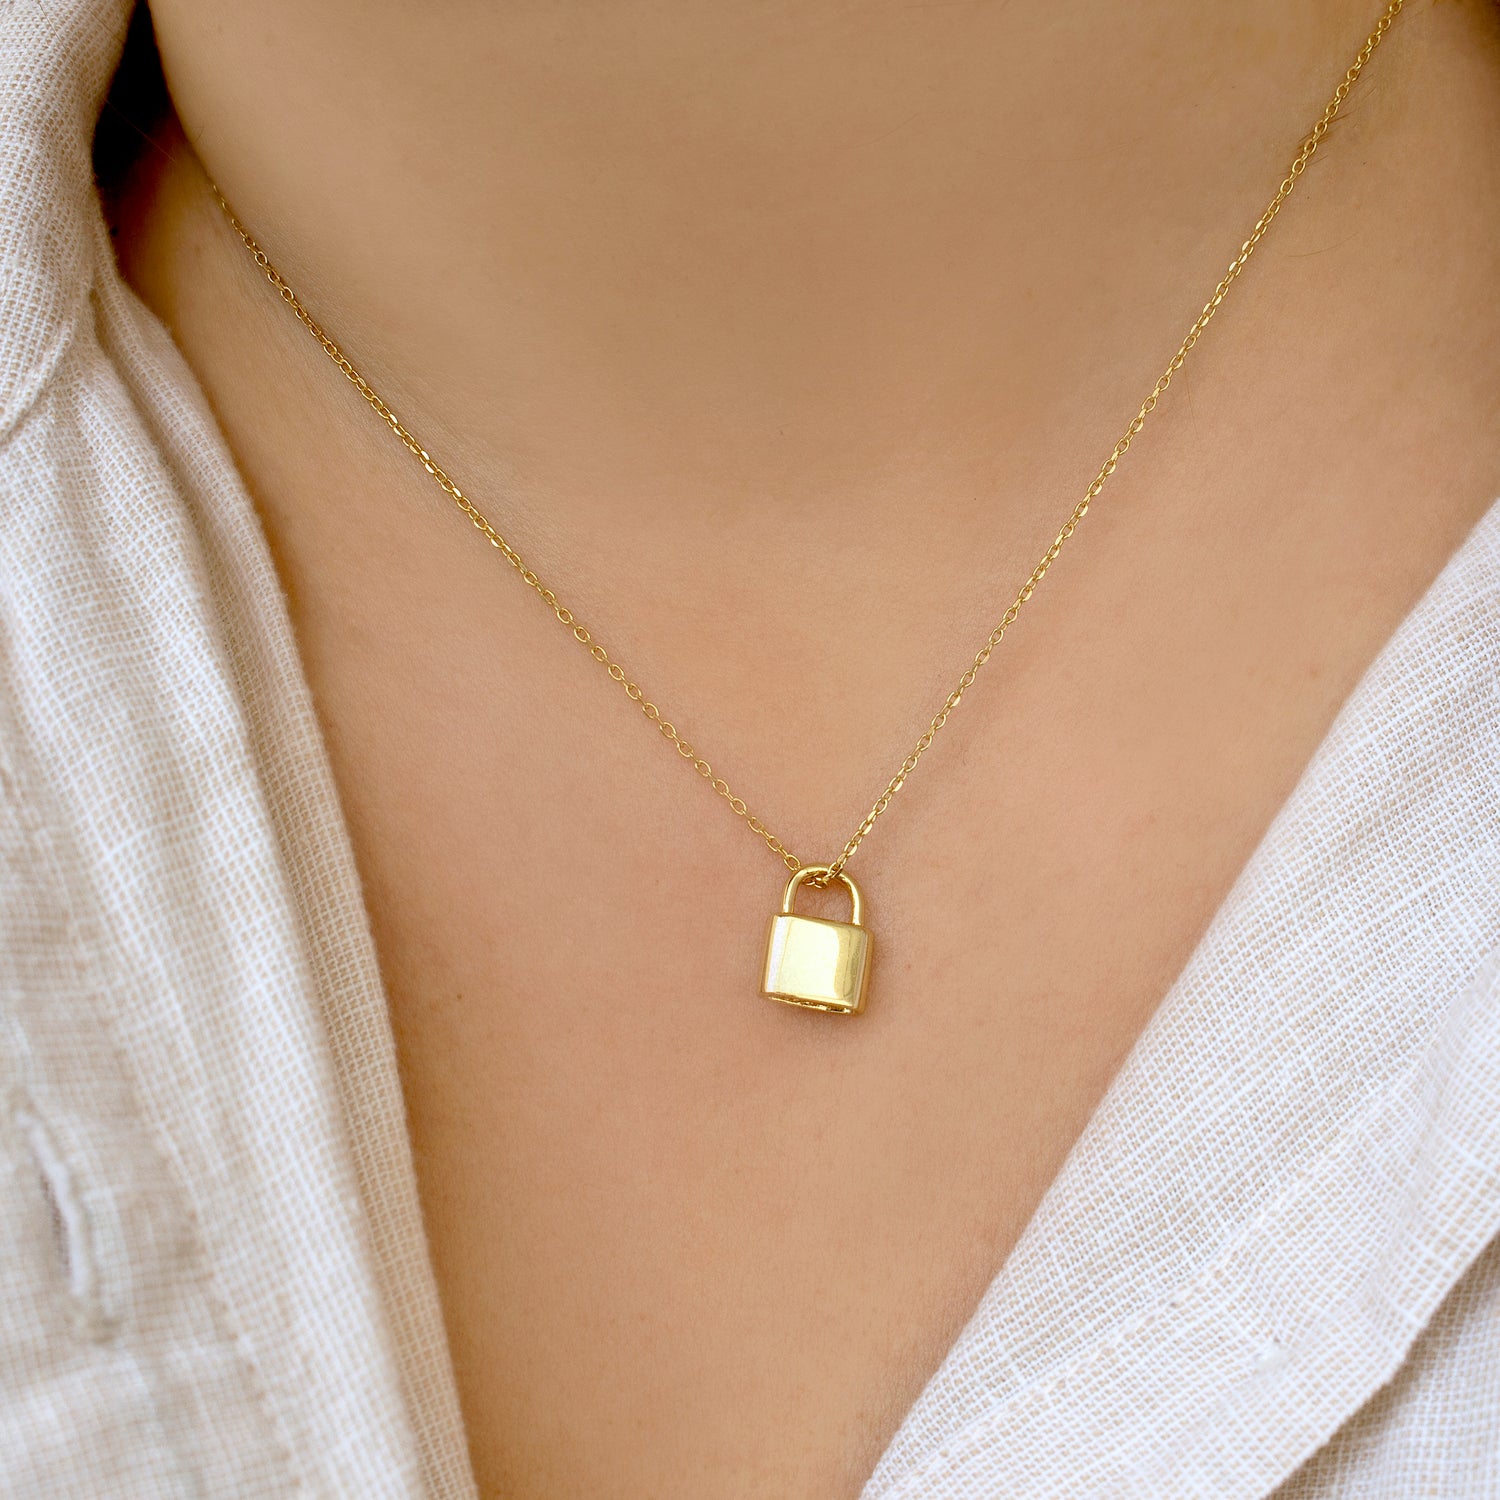 Love Padlock and Key Sparkle Chain Necklace 14K Yellow Gold / 20 Inches by Baby Gold - Shop Custom Gold Jewelry